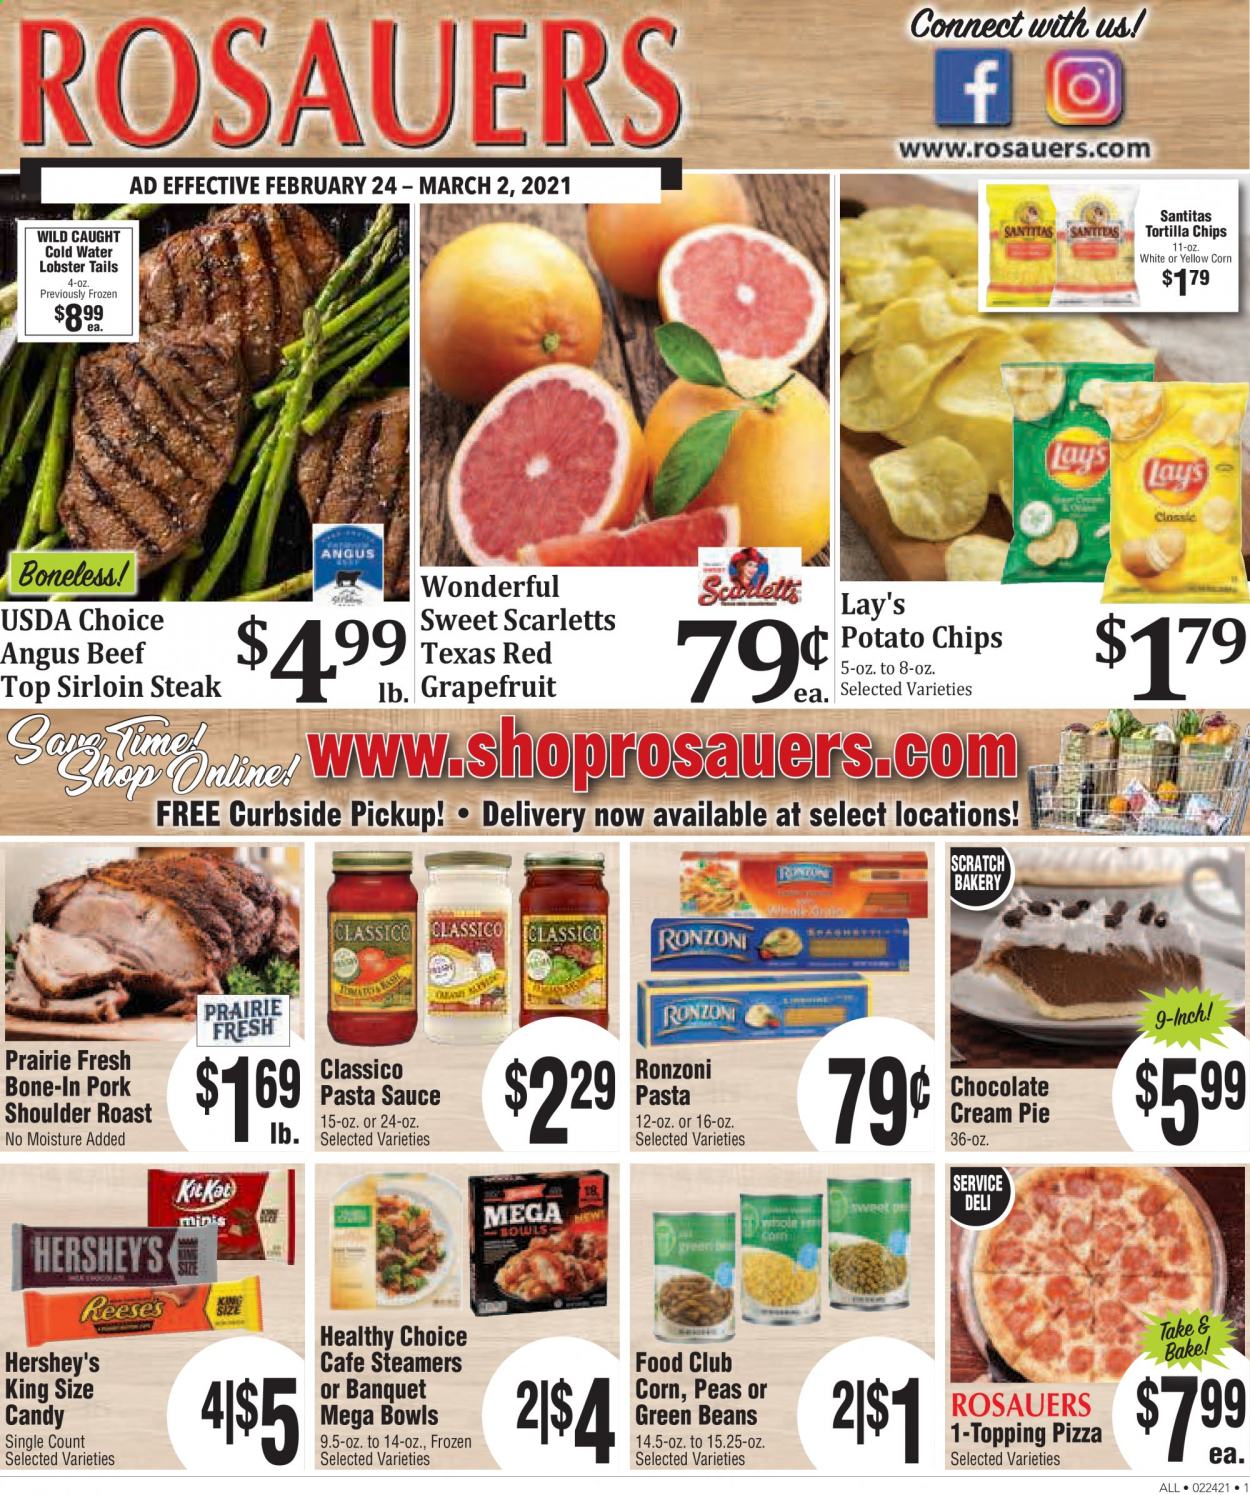 thumbnail - Rosauers Flyer - 02/24/2021 - 03/02/2021 - Sales products - green beans, pie, cream pie, lobster, lobster tail, pizza, sauce, Healthy Choice, Hershey's, beans, corn, peas, tortilla chips, potato chips, Lay’s, topping, pasta sauce, beef meat, beef sirloin, steak, sirloin steak, pork meat, pork roast, pork shoulder. Page 1.